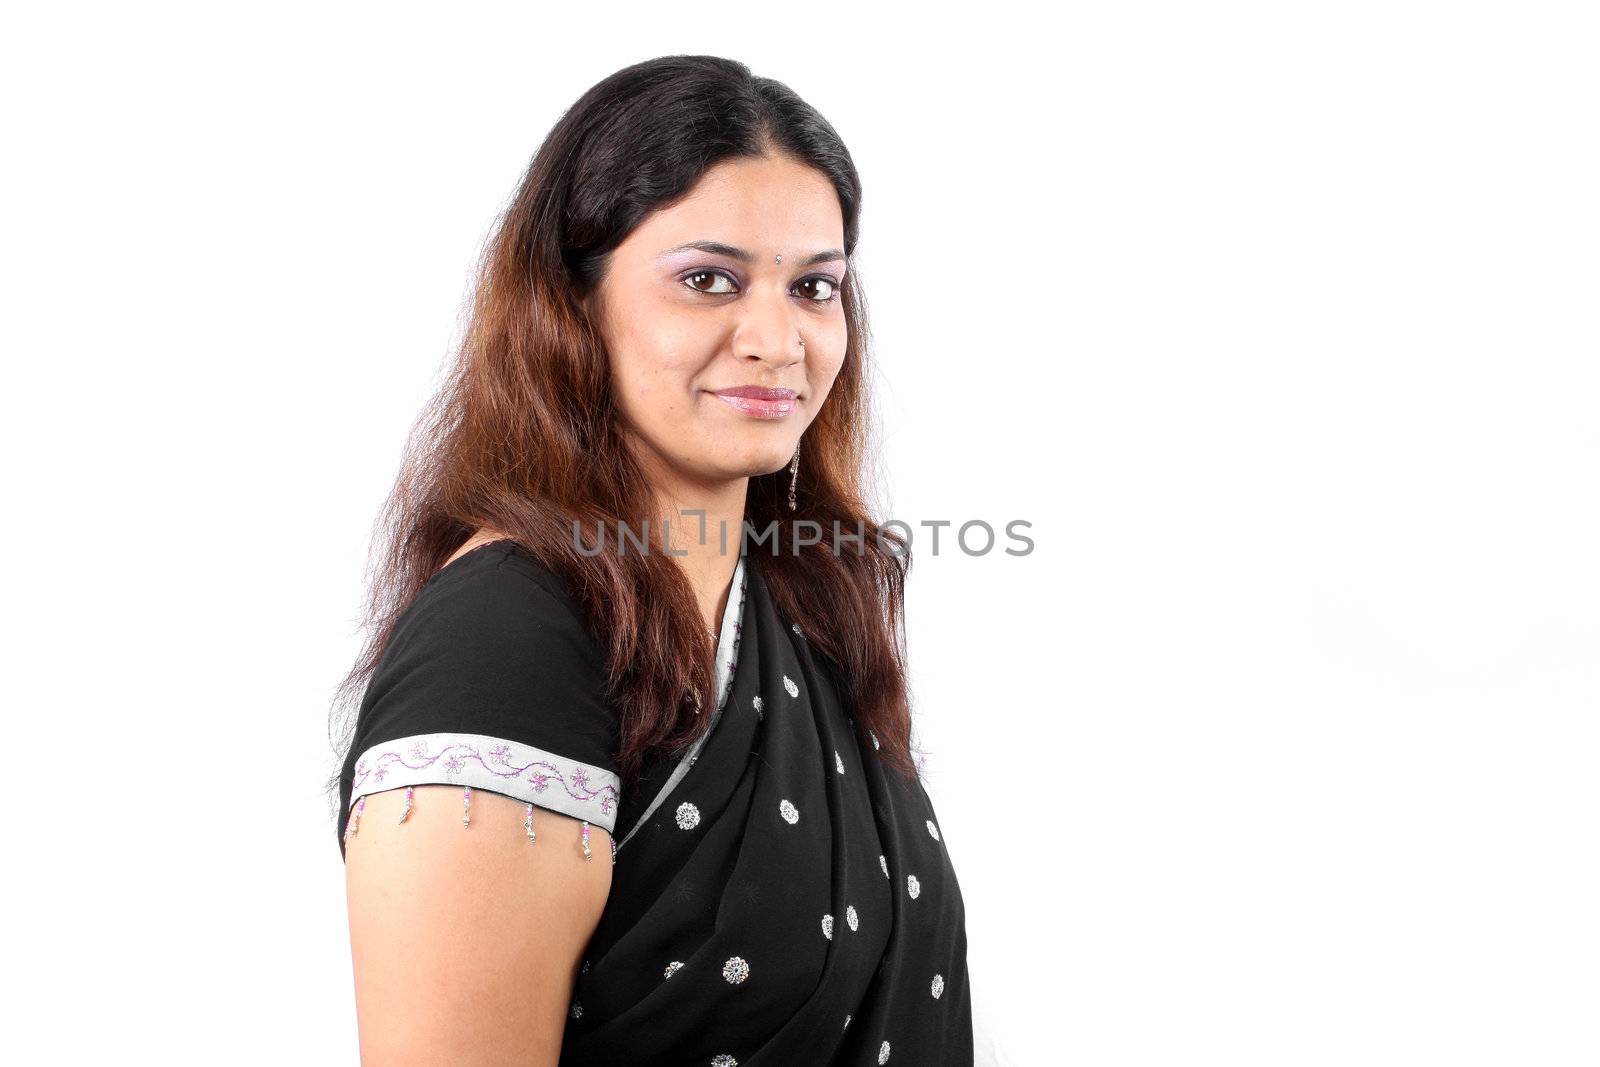 A portrait of a young Indian woman wearing a traditional black sari, on white studio background.